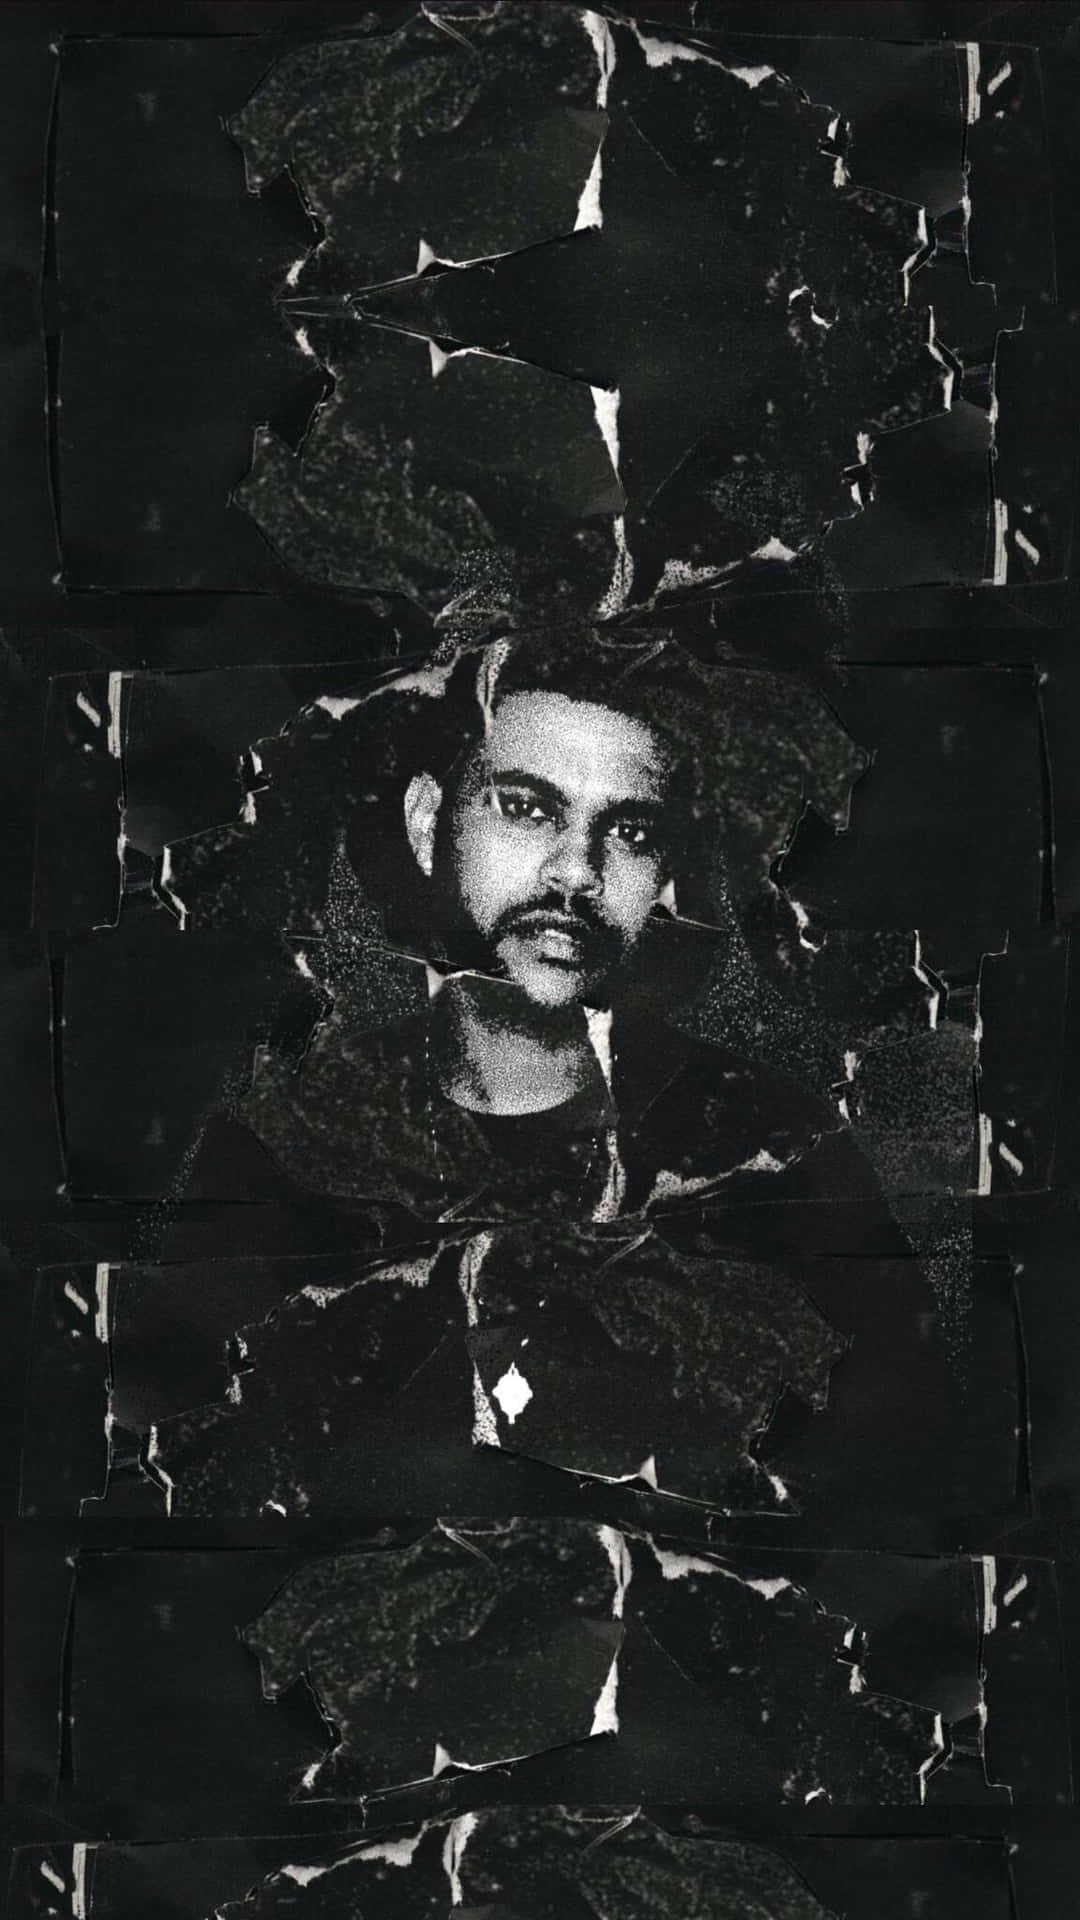 the weeknd iphone wallpaper